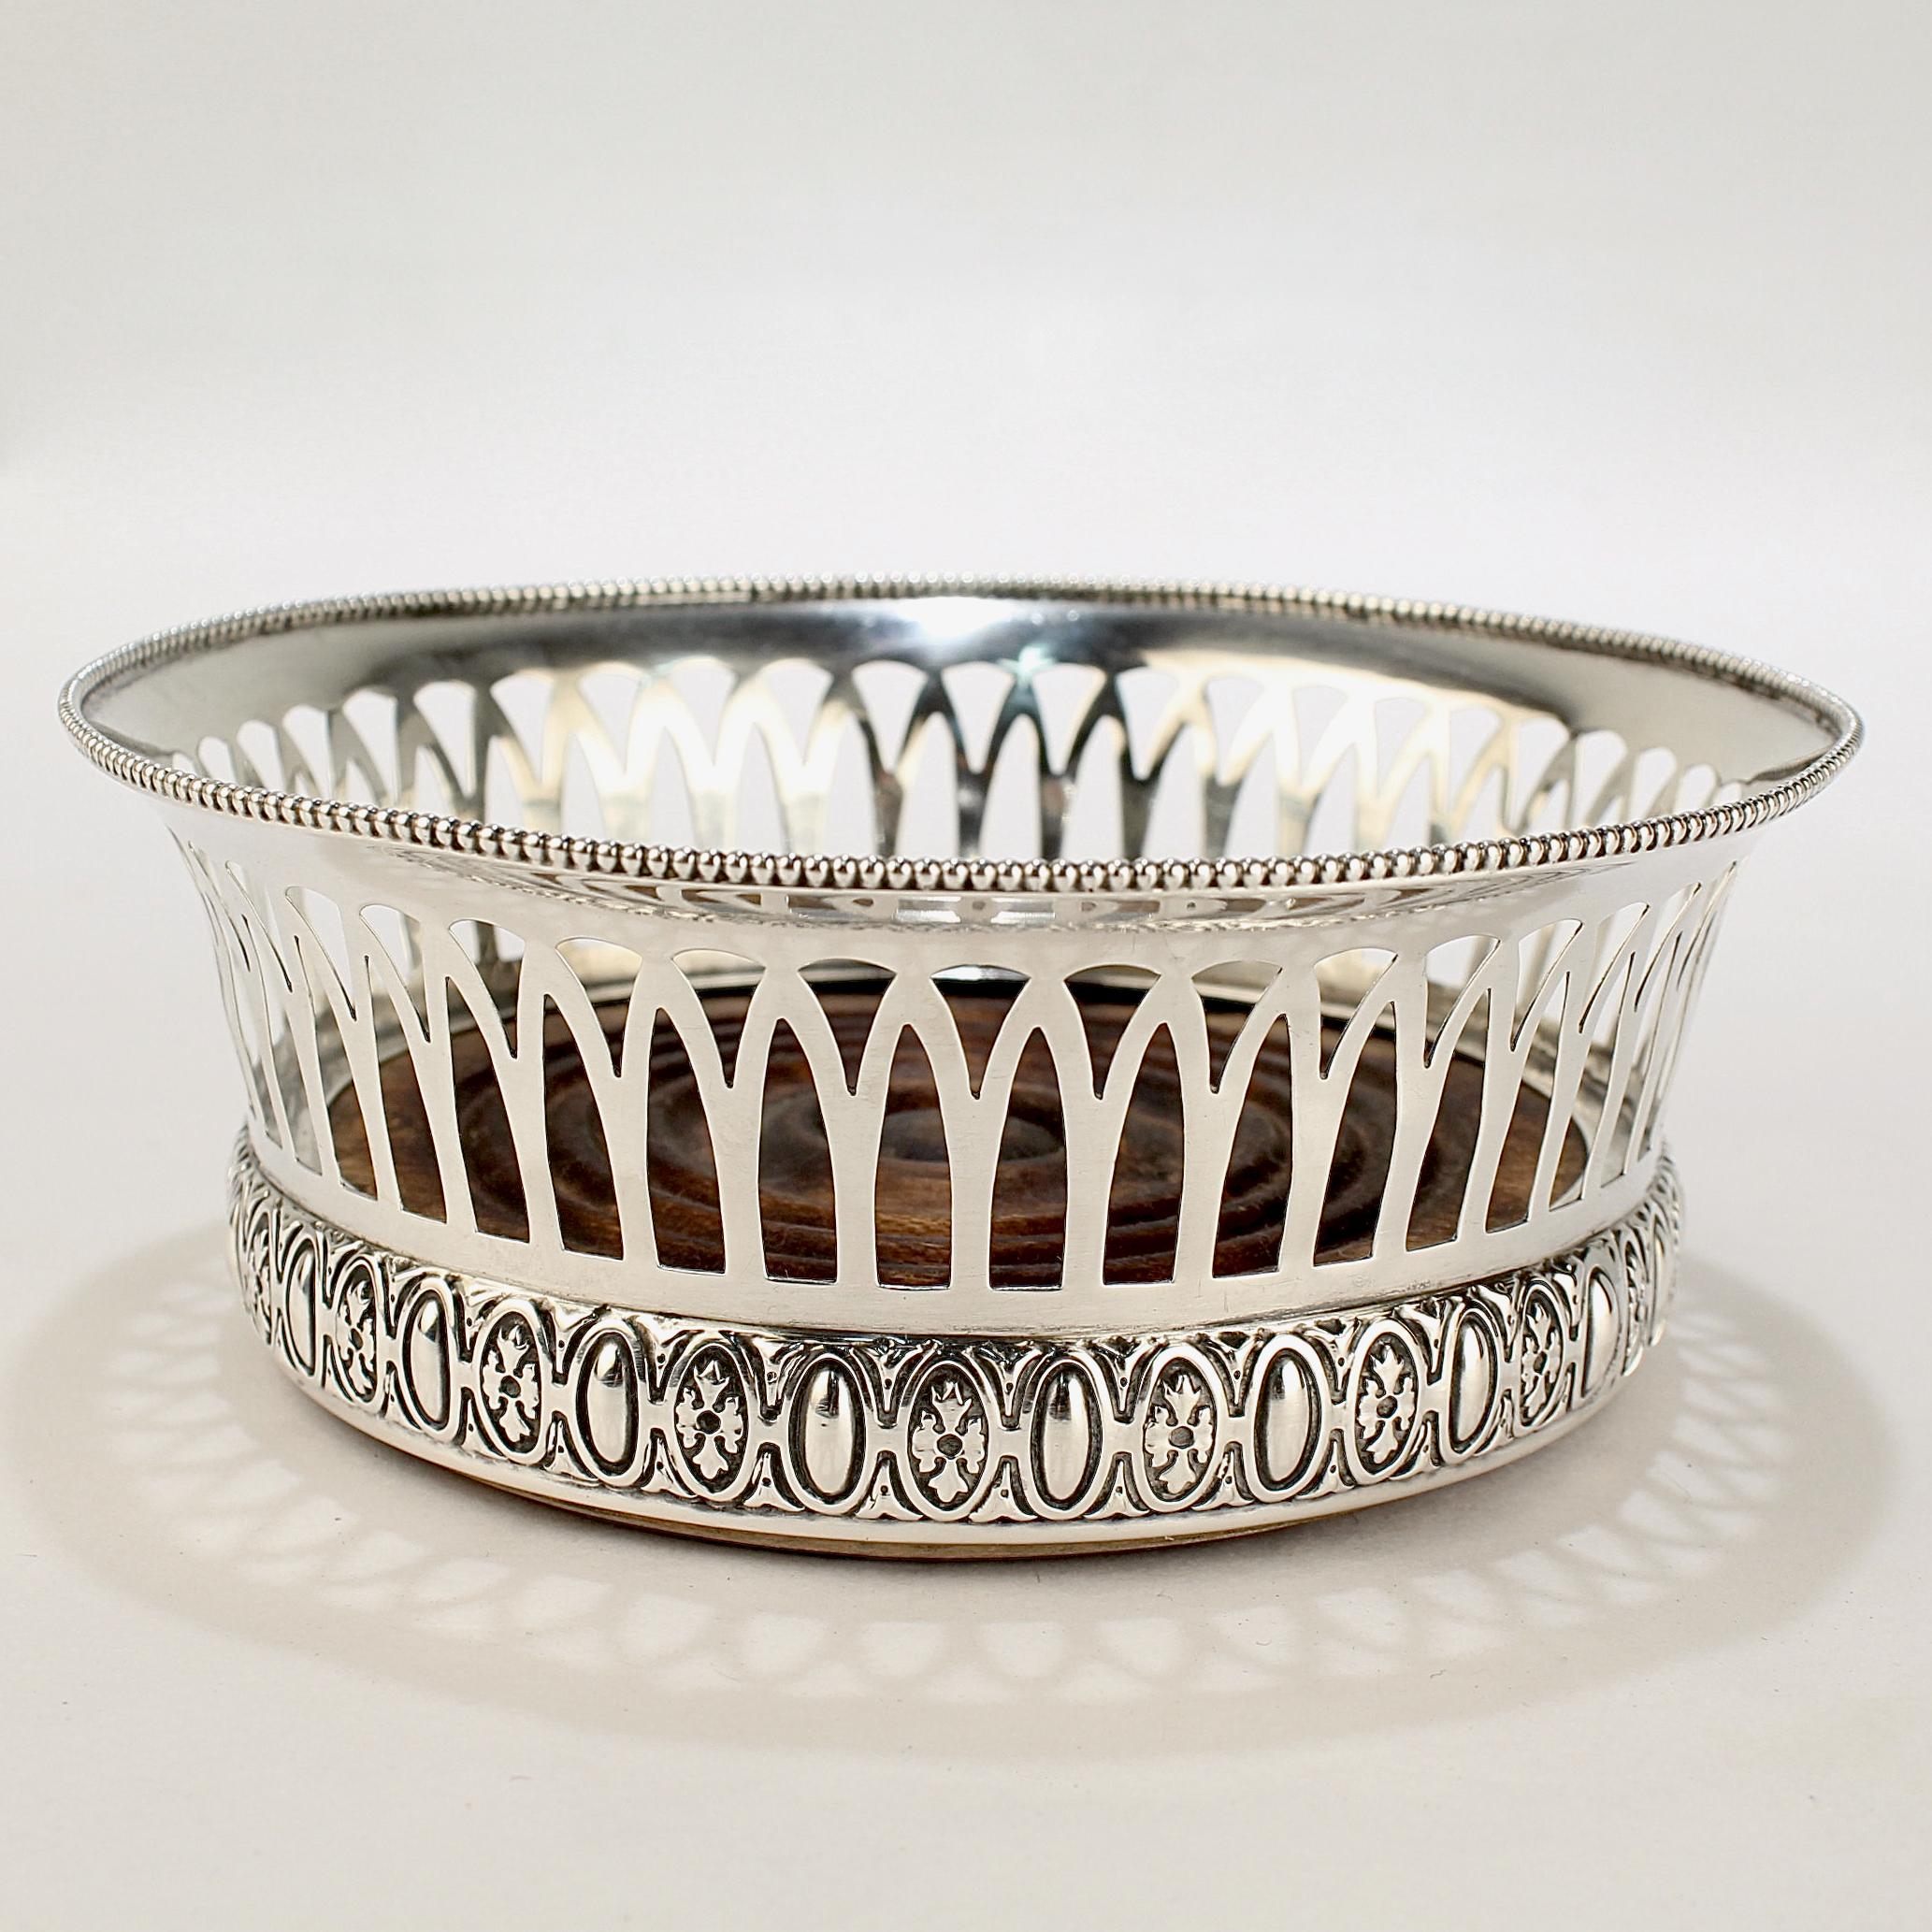 A fine antique sterling silver wine coaster.

By Gorham Silversmiths.

With a beaded rim and flared top supported by reticulated sides and an ornate base. 

Having a bird's eye maple wooden insert or base.

Simply an amazing 19th Century American